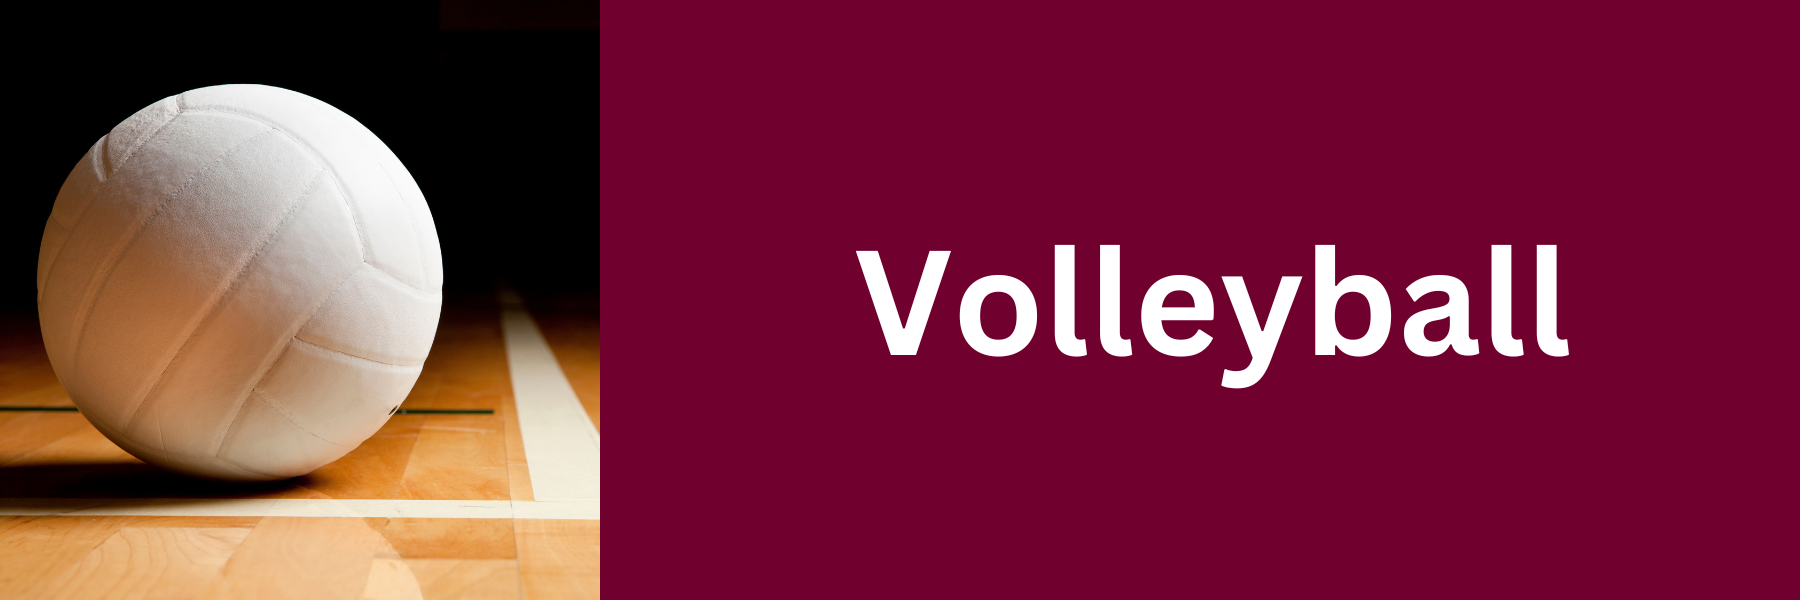 vball-other-side.png